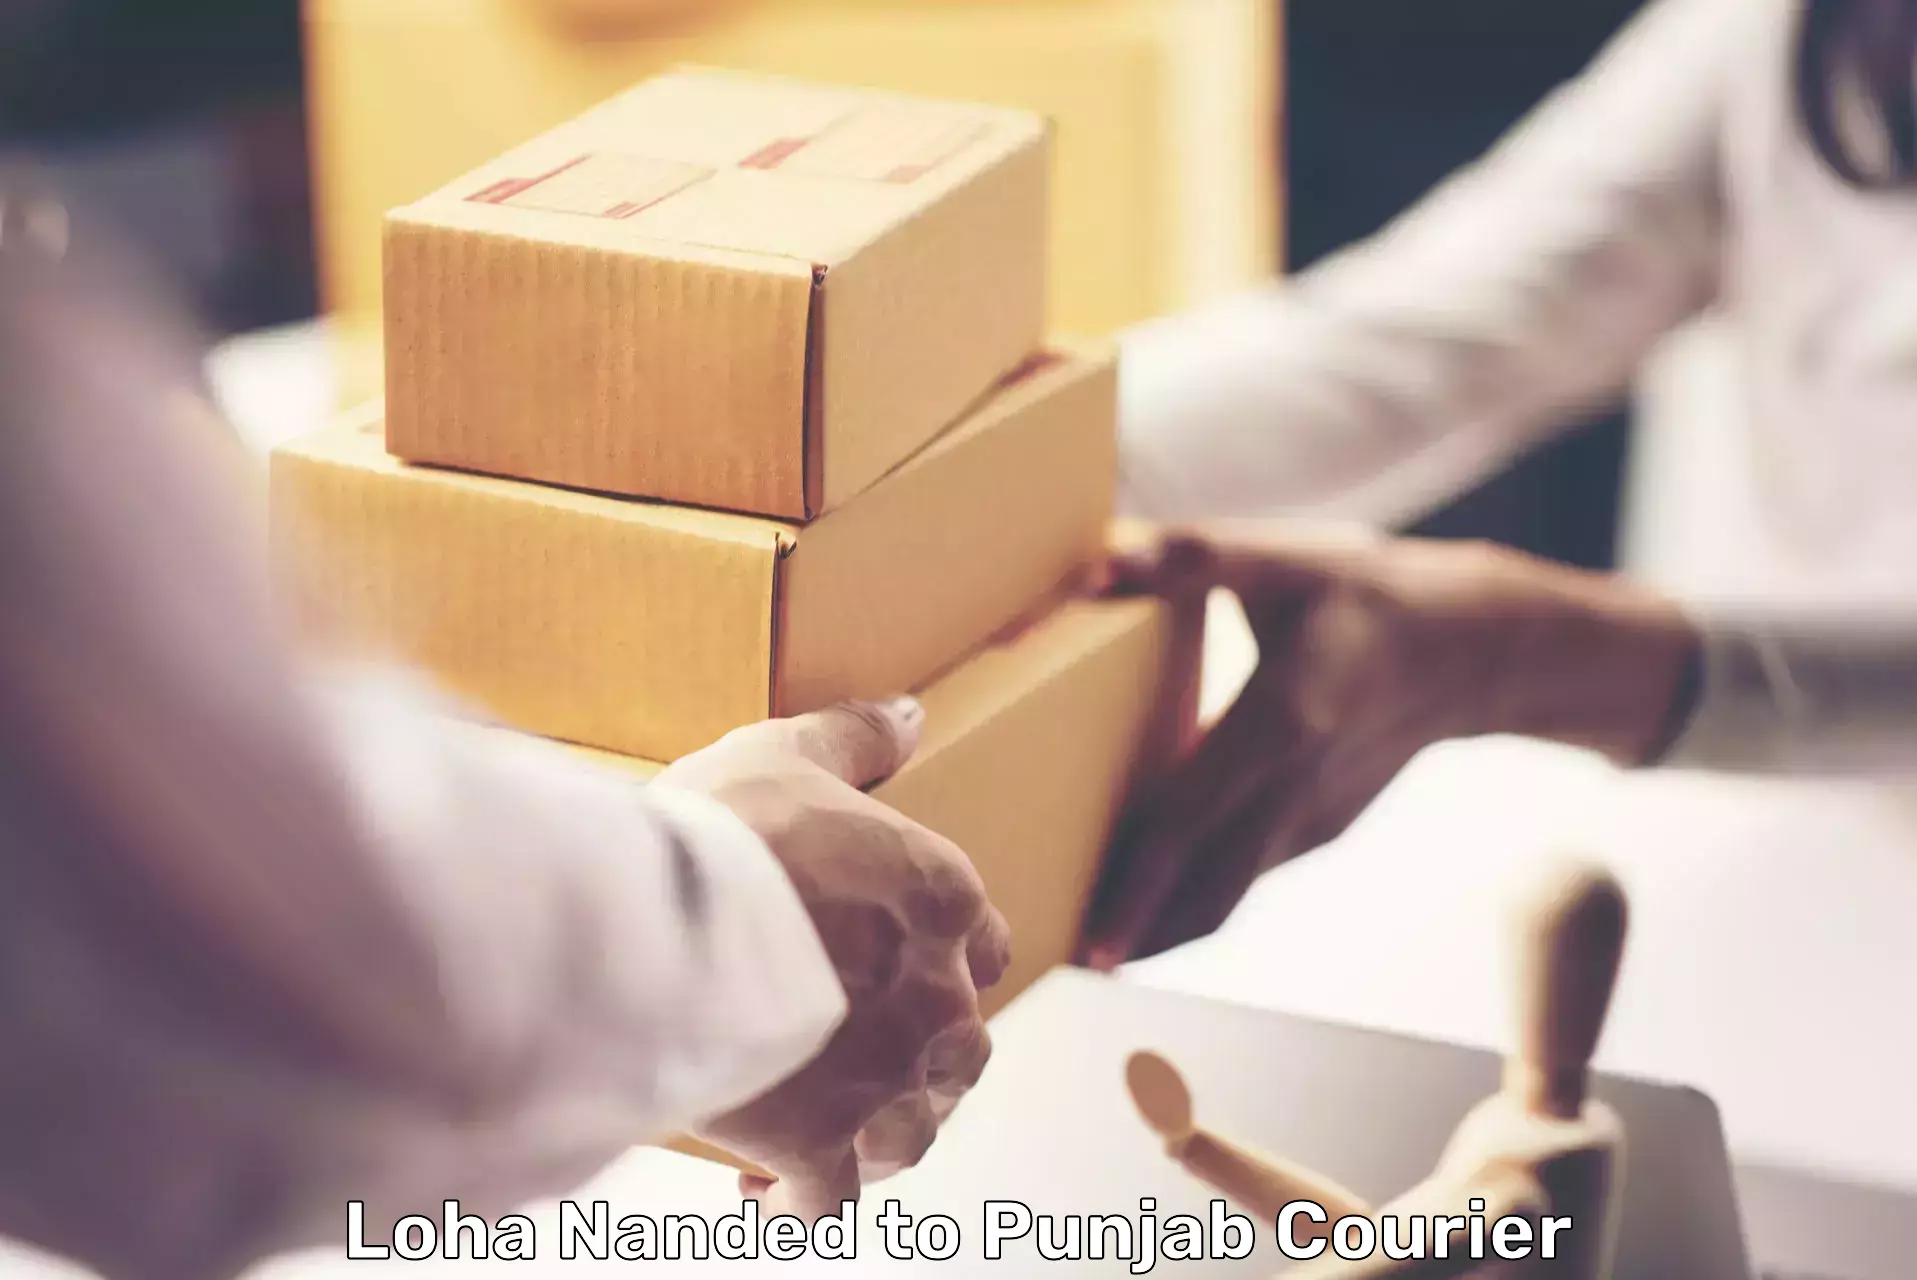 Online package tracking Loha Nanded to Punjab